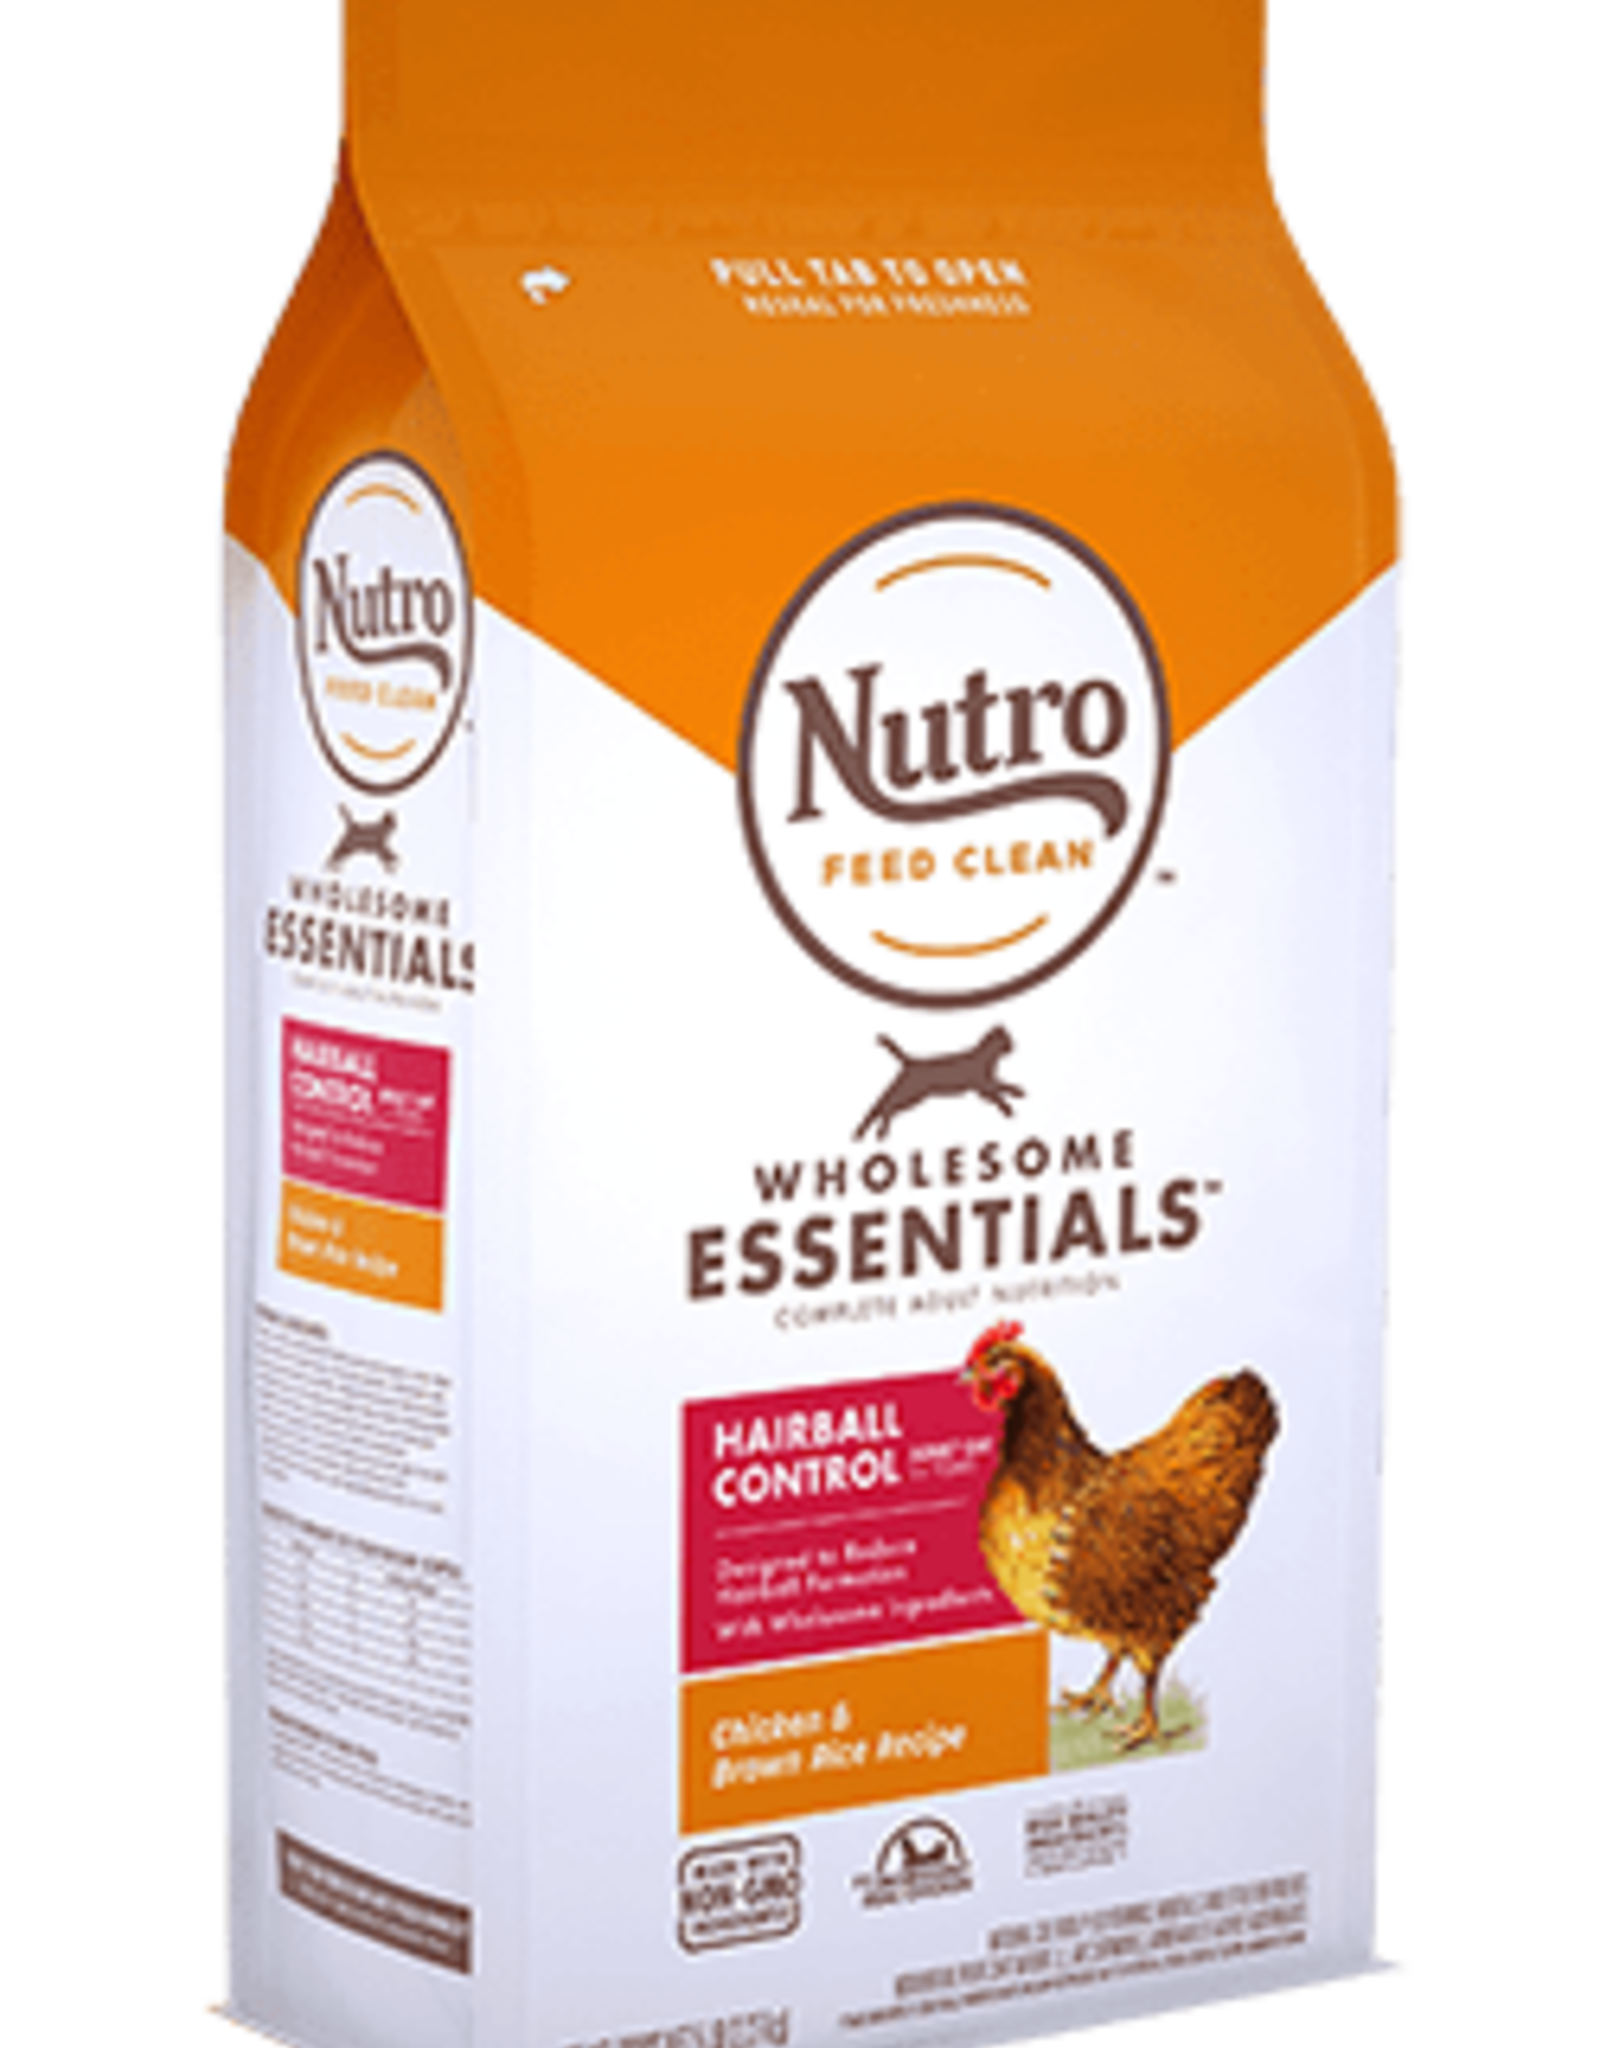 NUTRO PRODUCTS  INC. NUTRO WHOLESOME ESSENTIALS ADULT CAT HAIRBALL CHICKEN 5LBS